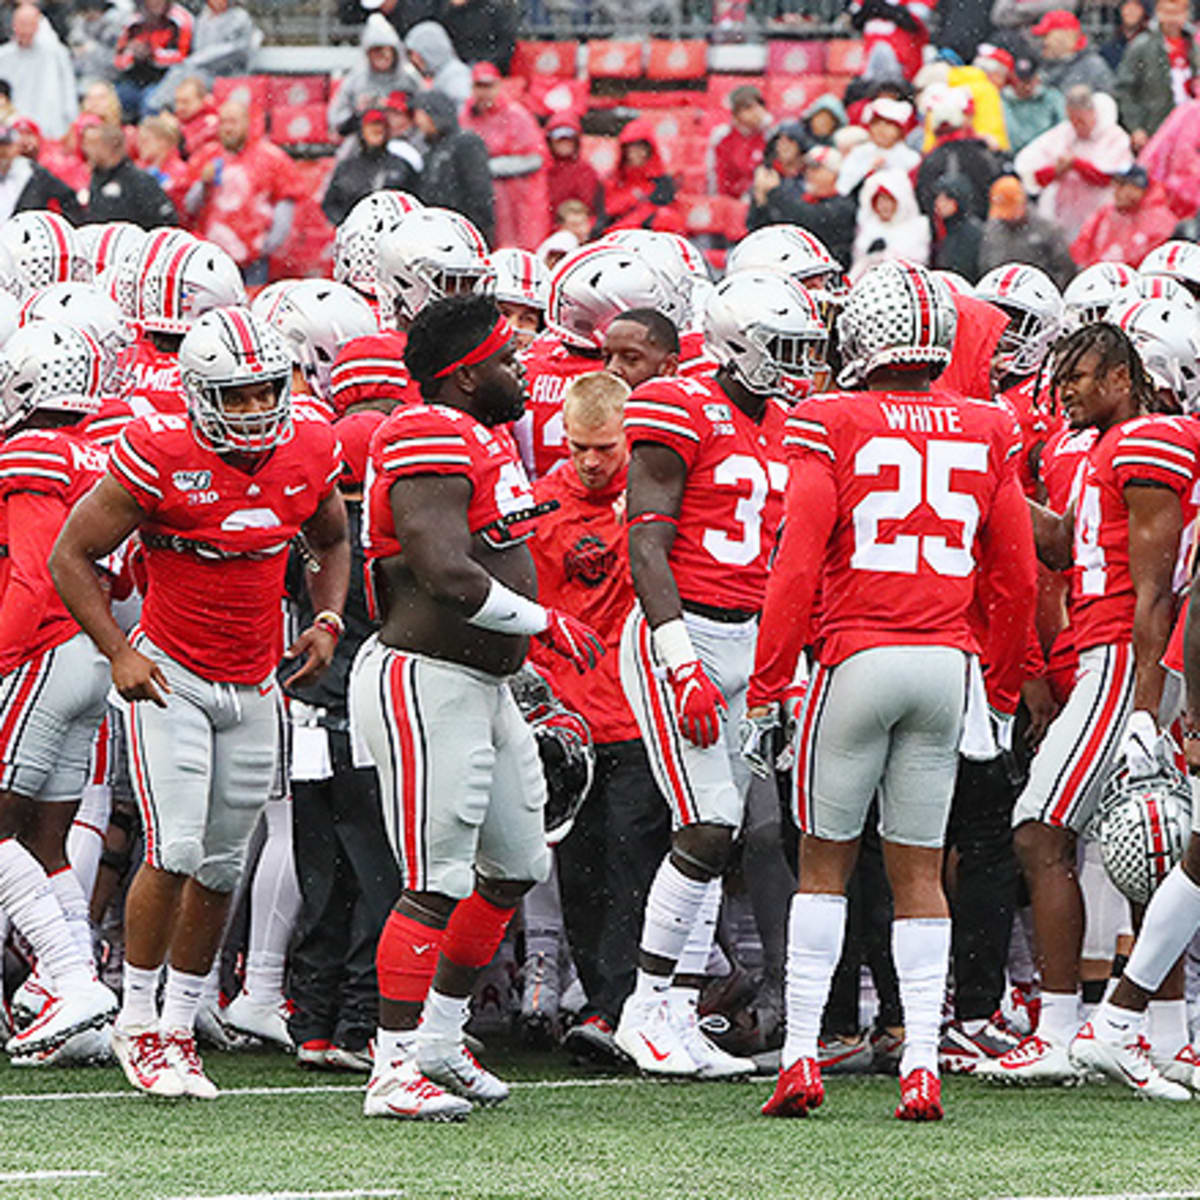 Ohio State Football: Buckeyes' 2020 Spring Preview - AthlonSports 